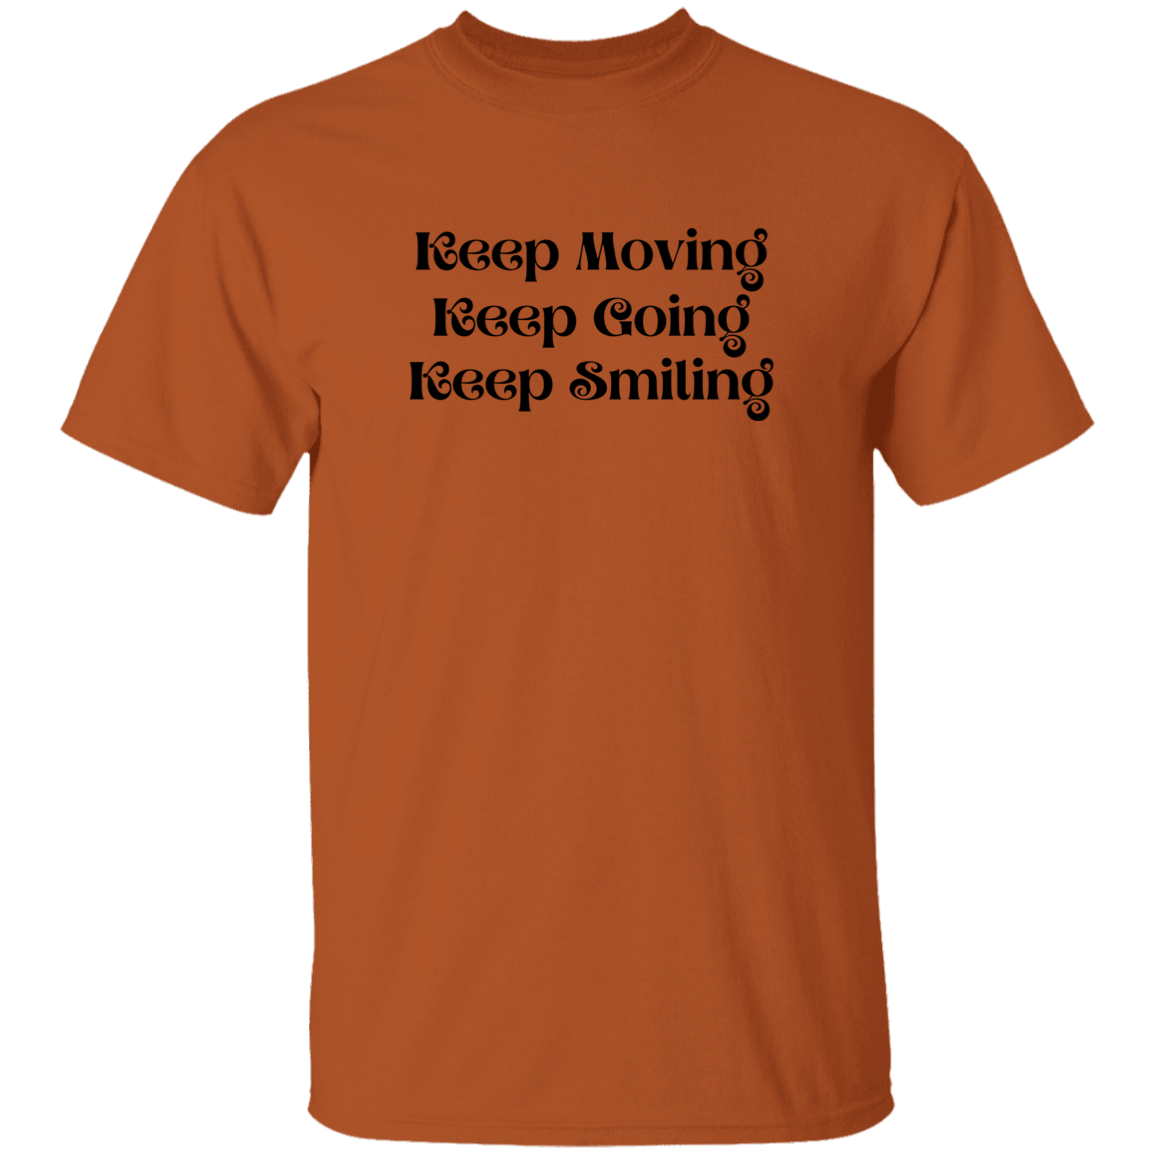 Keep Moving/Going/Smiling - T-Shirt